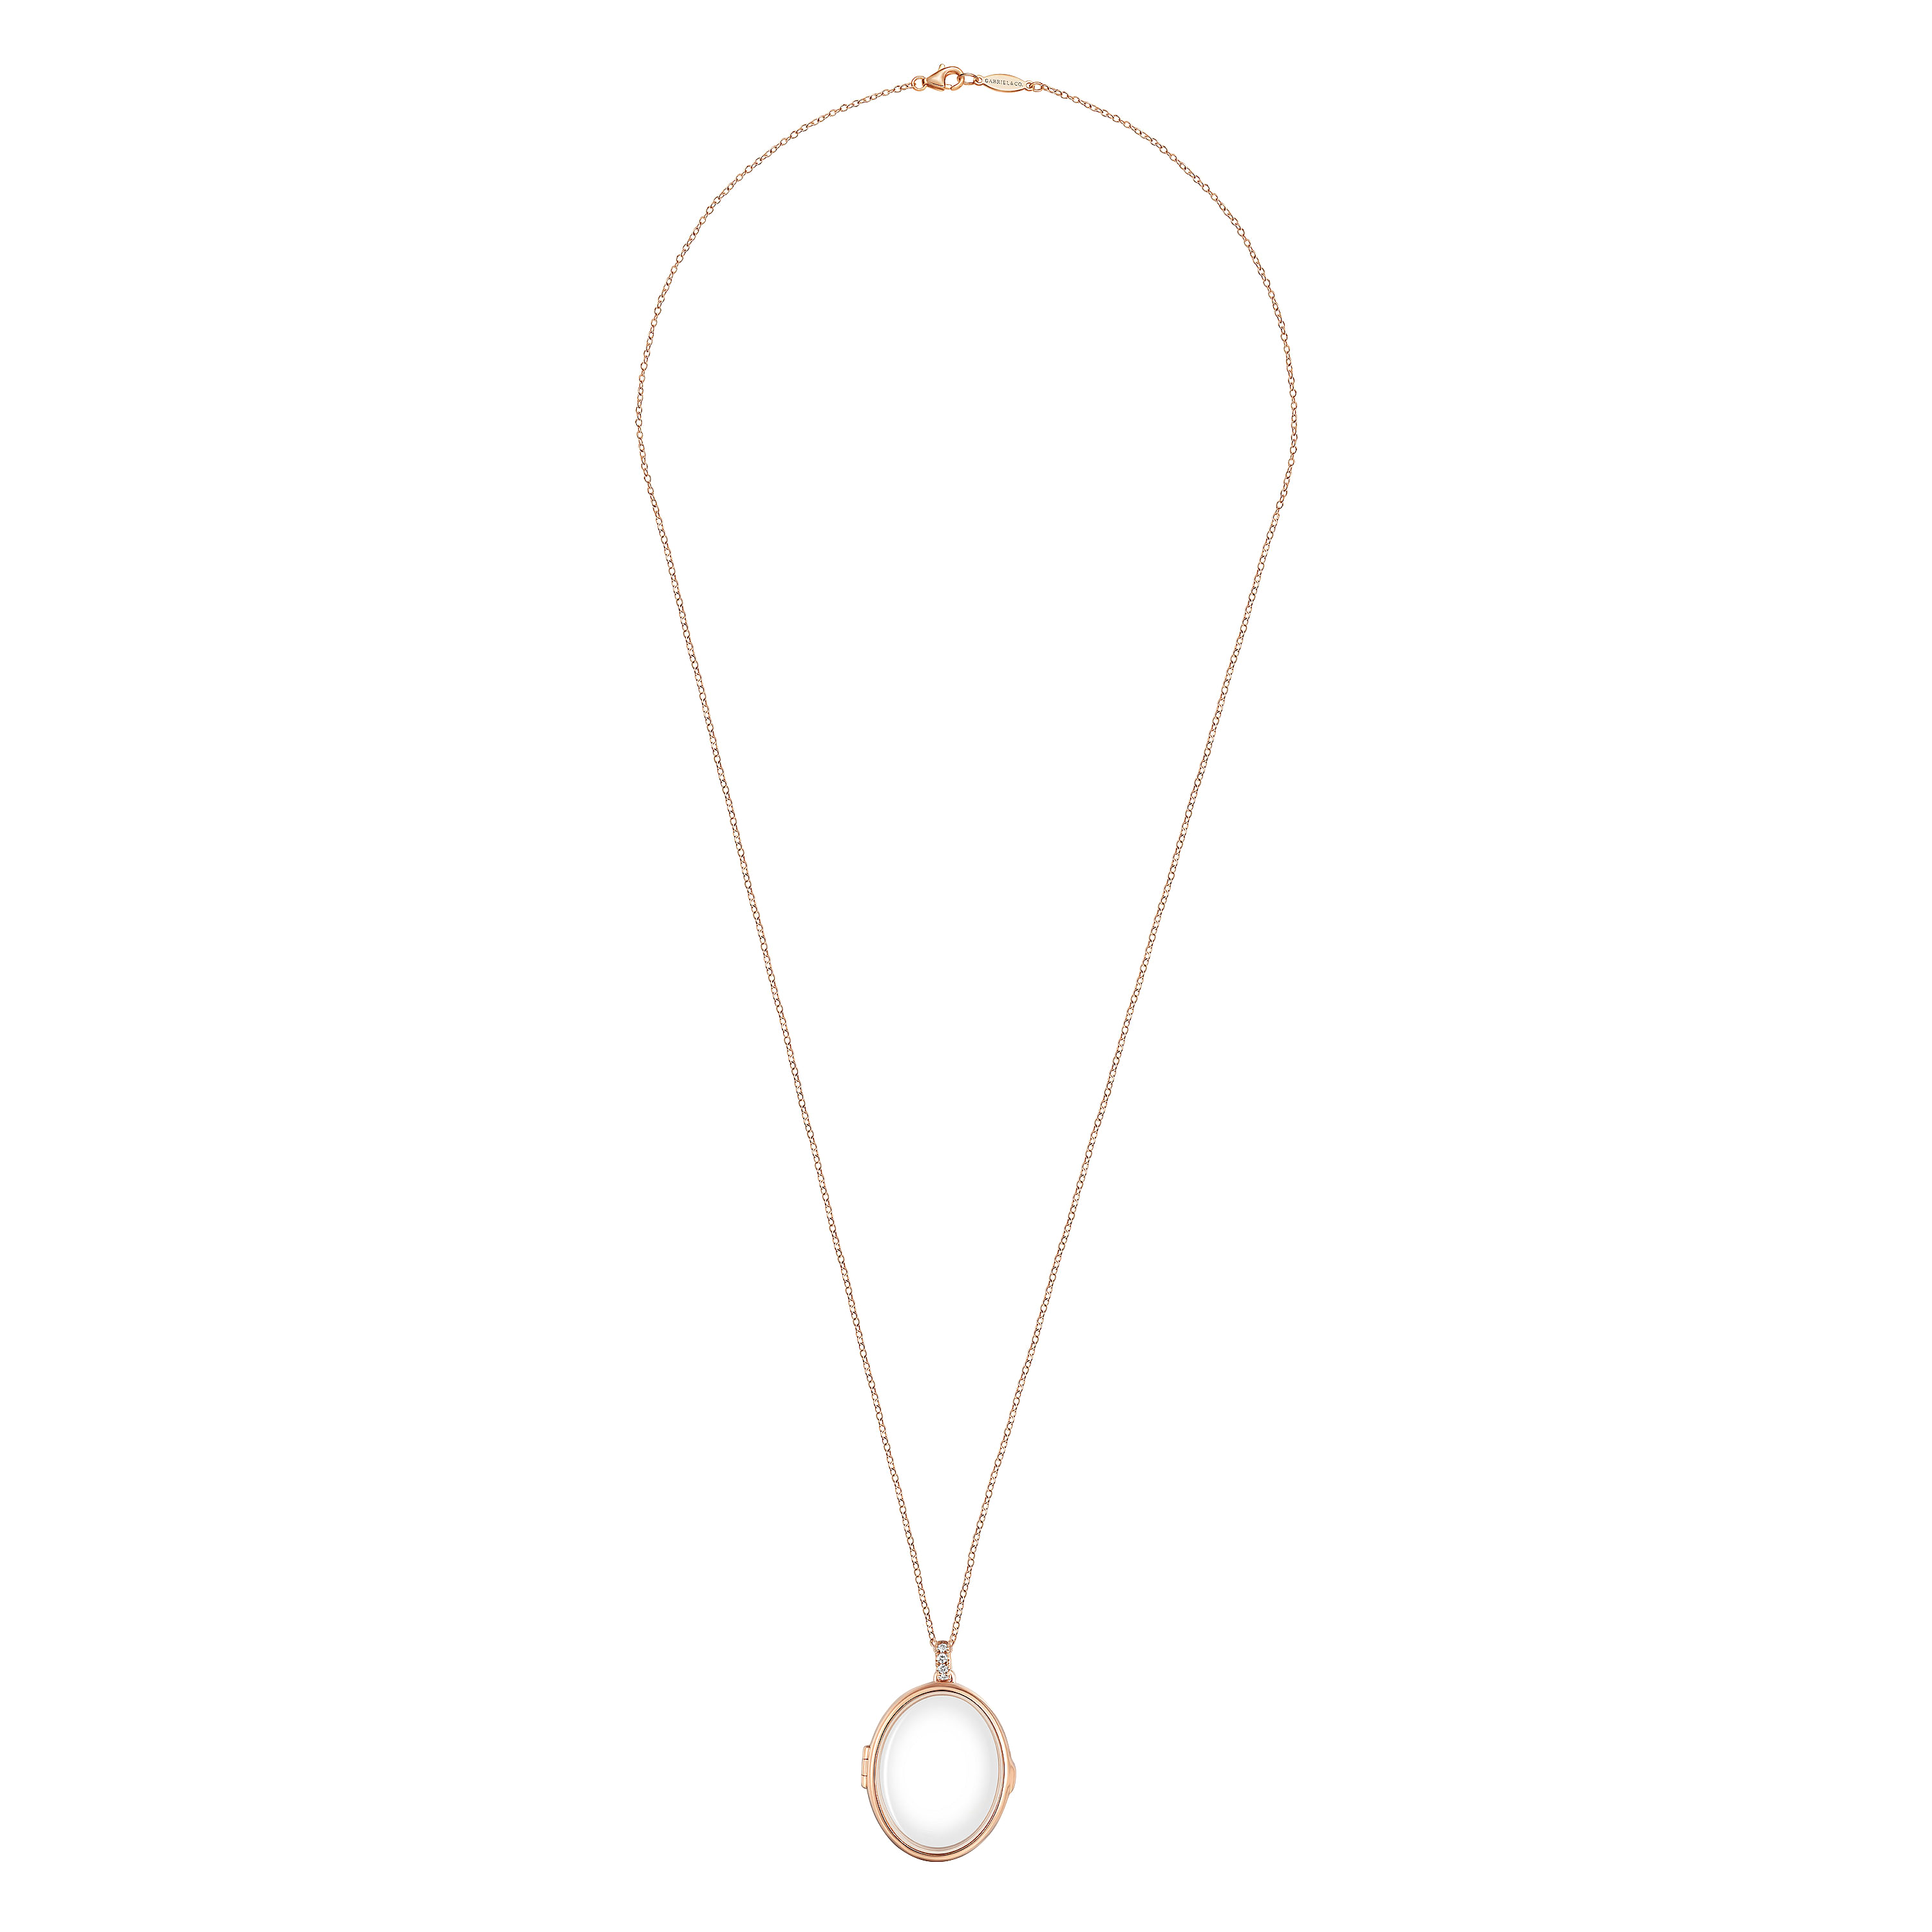 25 inch 14K Rose Gold Oval Glass Front Locket Necklace